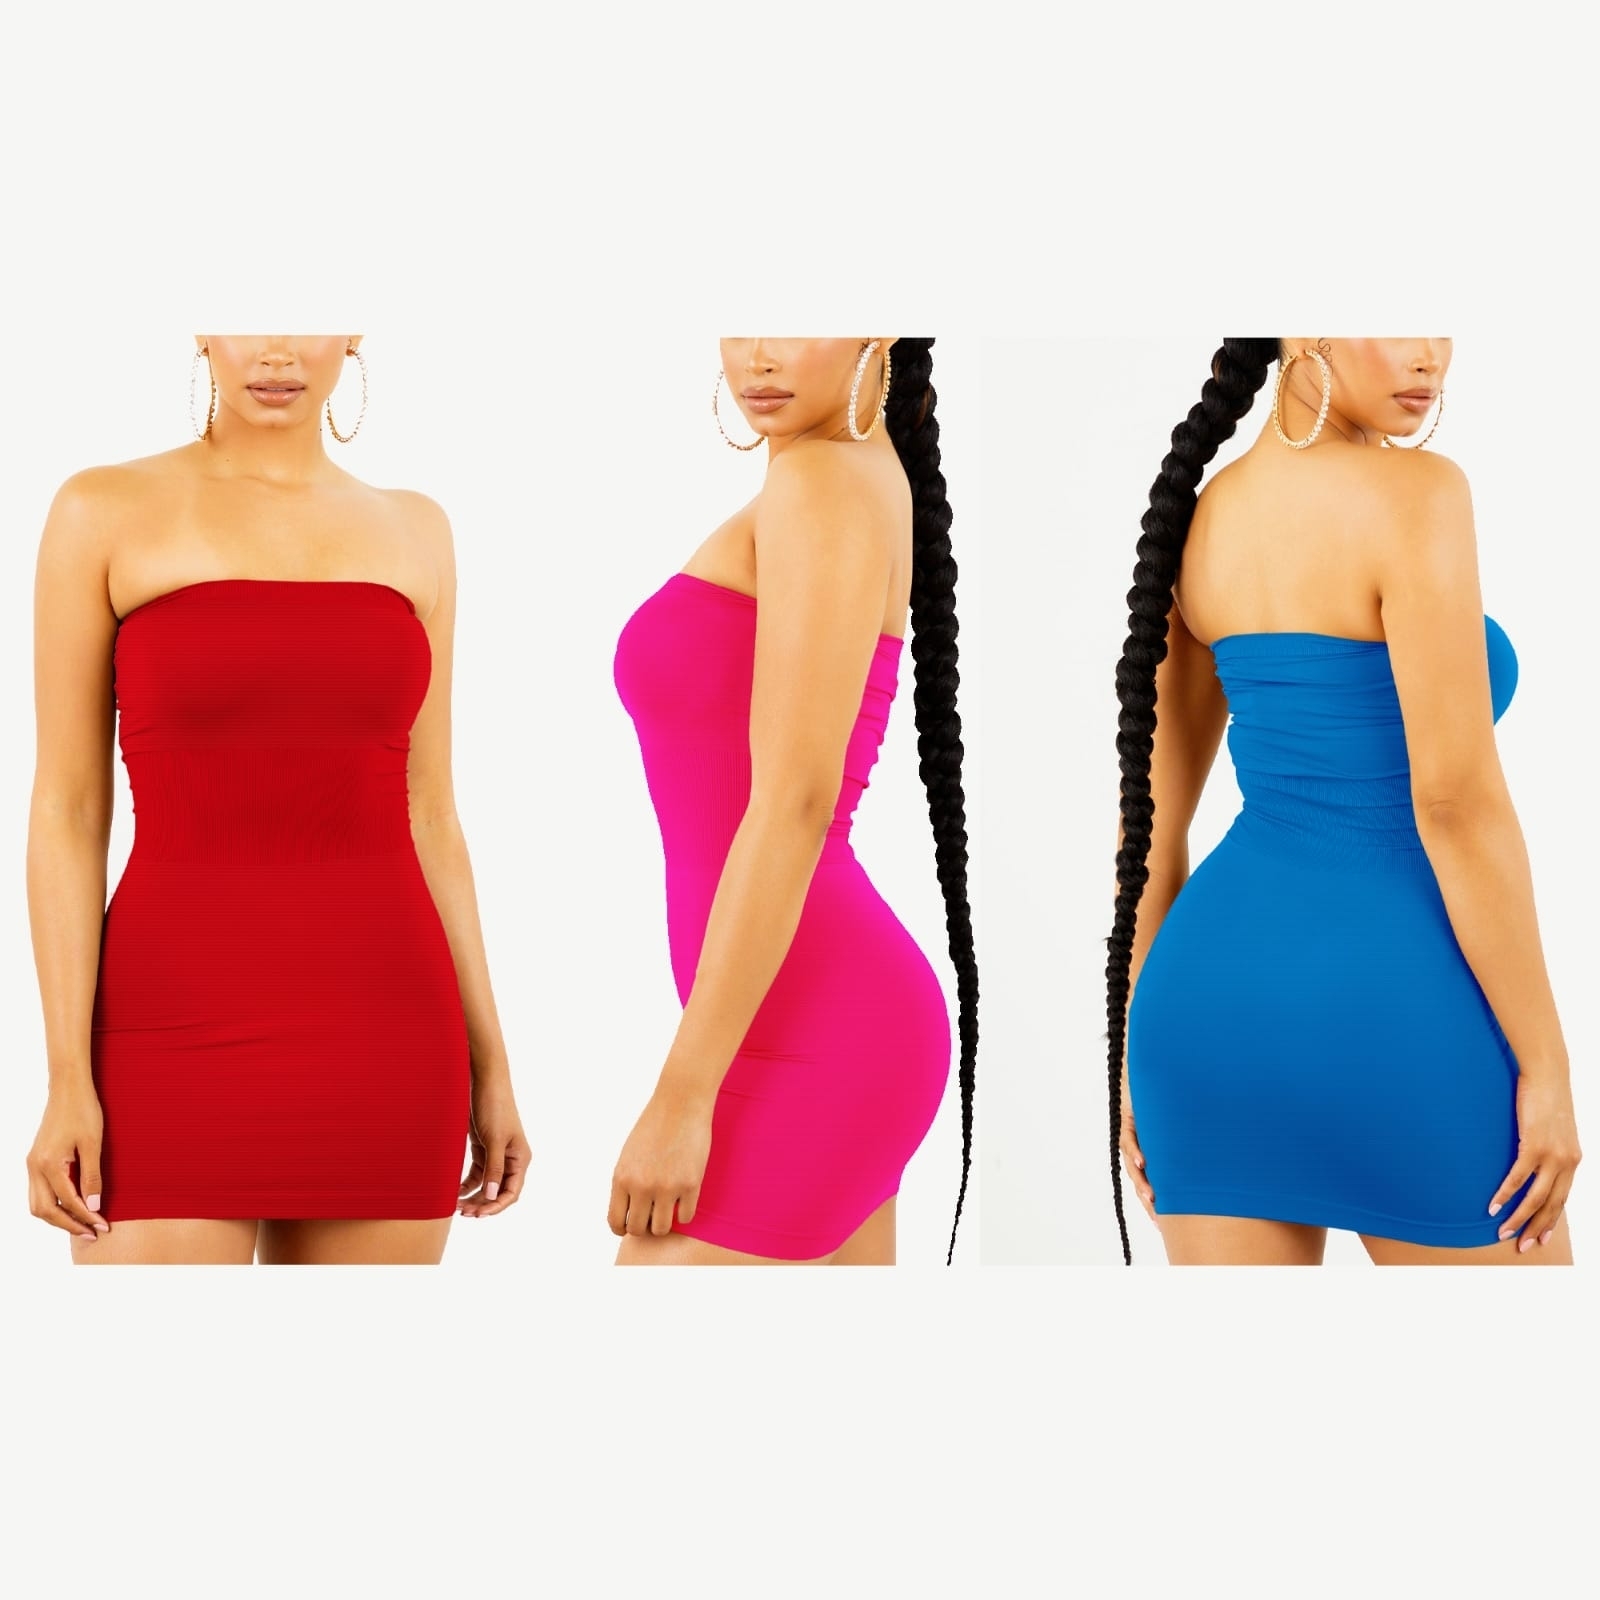 3-Pack Women's Strapless Stretchy Seamless Tight Fit Body Con Mini Tube Top Dress - RED, S